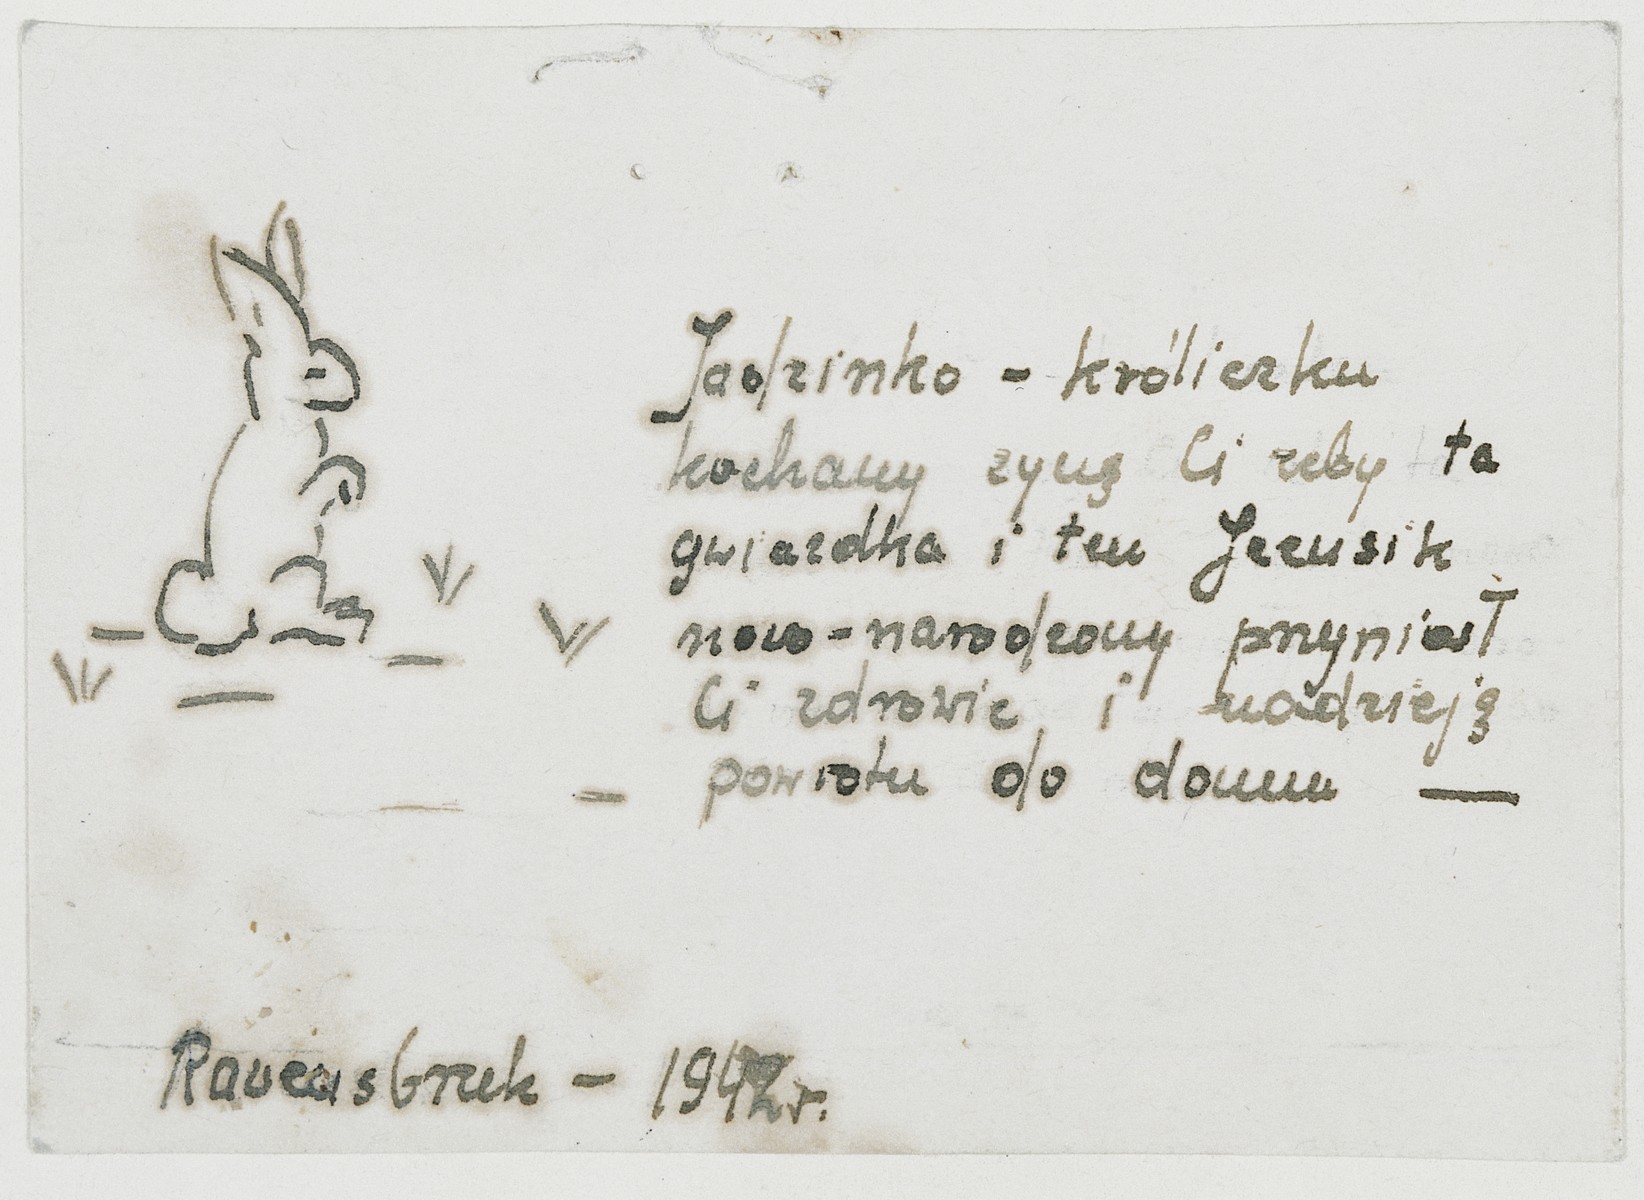 Christmas card given to Polish political prisoner, Jadwiga Dzido by a fellow inmate of the Ravensbrueck concentration camp.

The card is decorated with a drawing of a rabbit, a reference to their common experience as victims of medical experimentation (like laboratory rabbits).

The Polish text reads: "Dear Jadzienko Little Rabbit, For Christmas I wish that baby Jesus will grant you health and hope and that you will get back home."